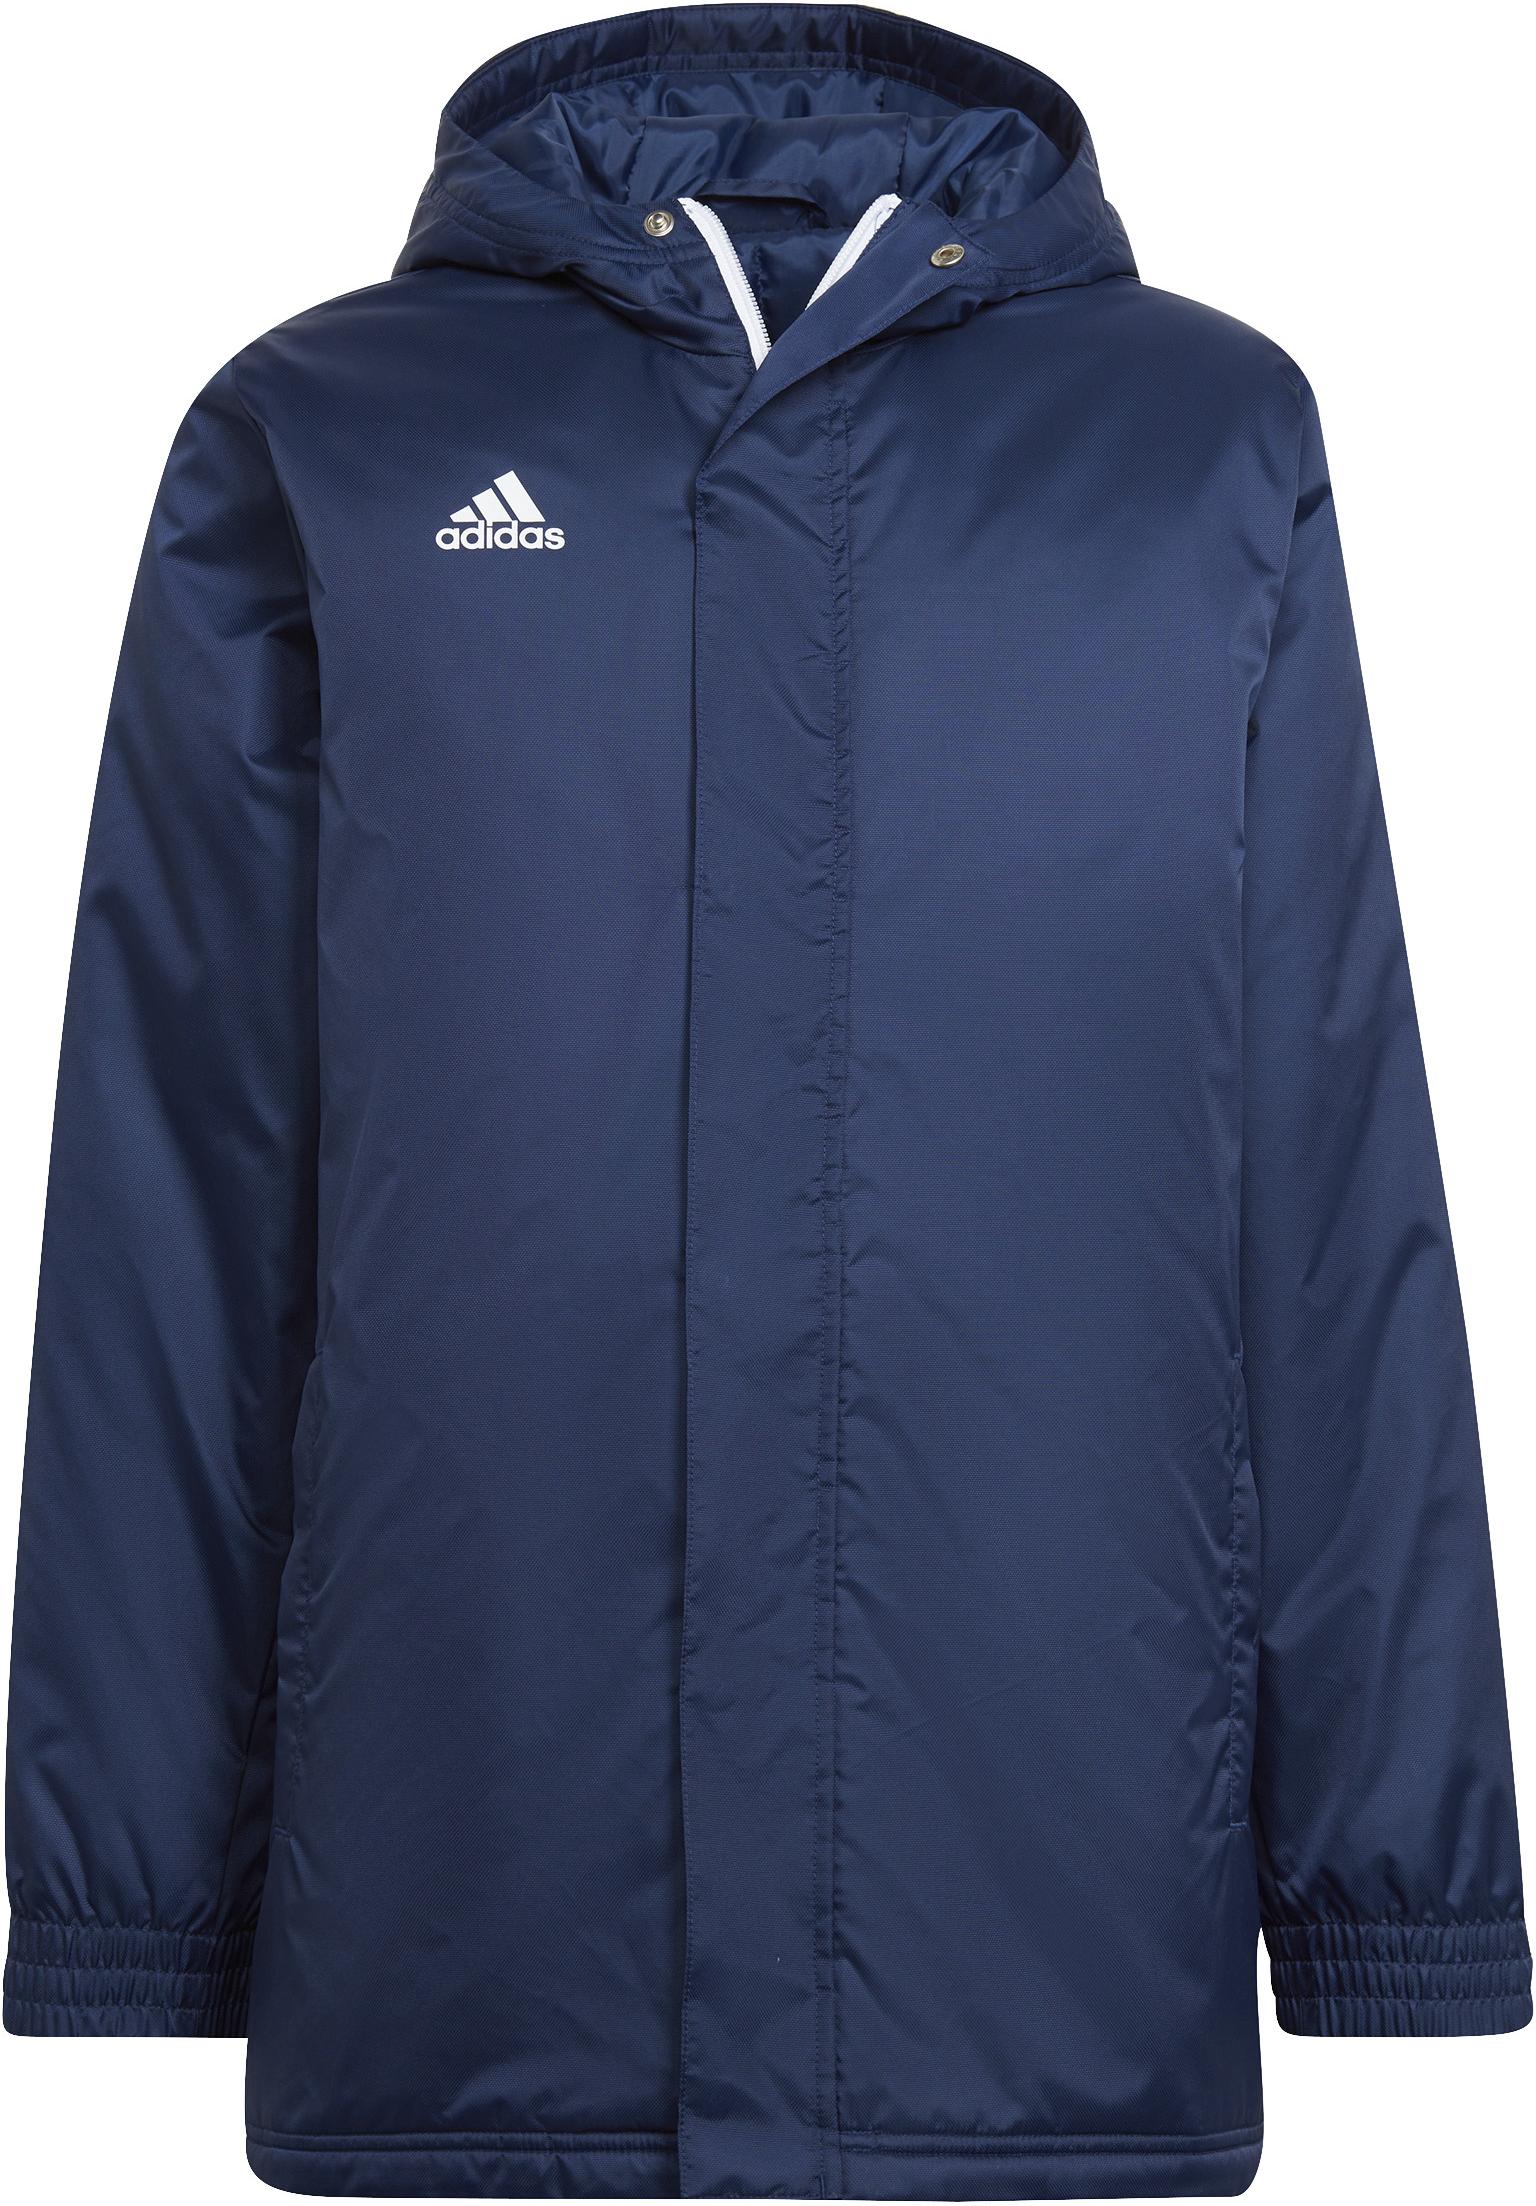 Hoodie adidas ENT22 STAD JKTY